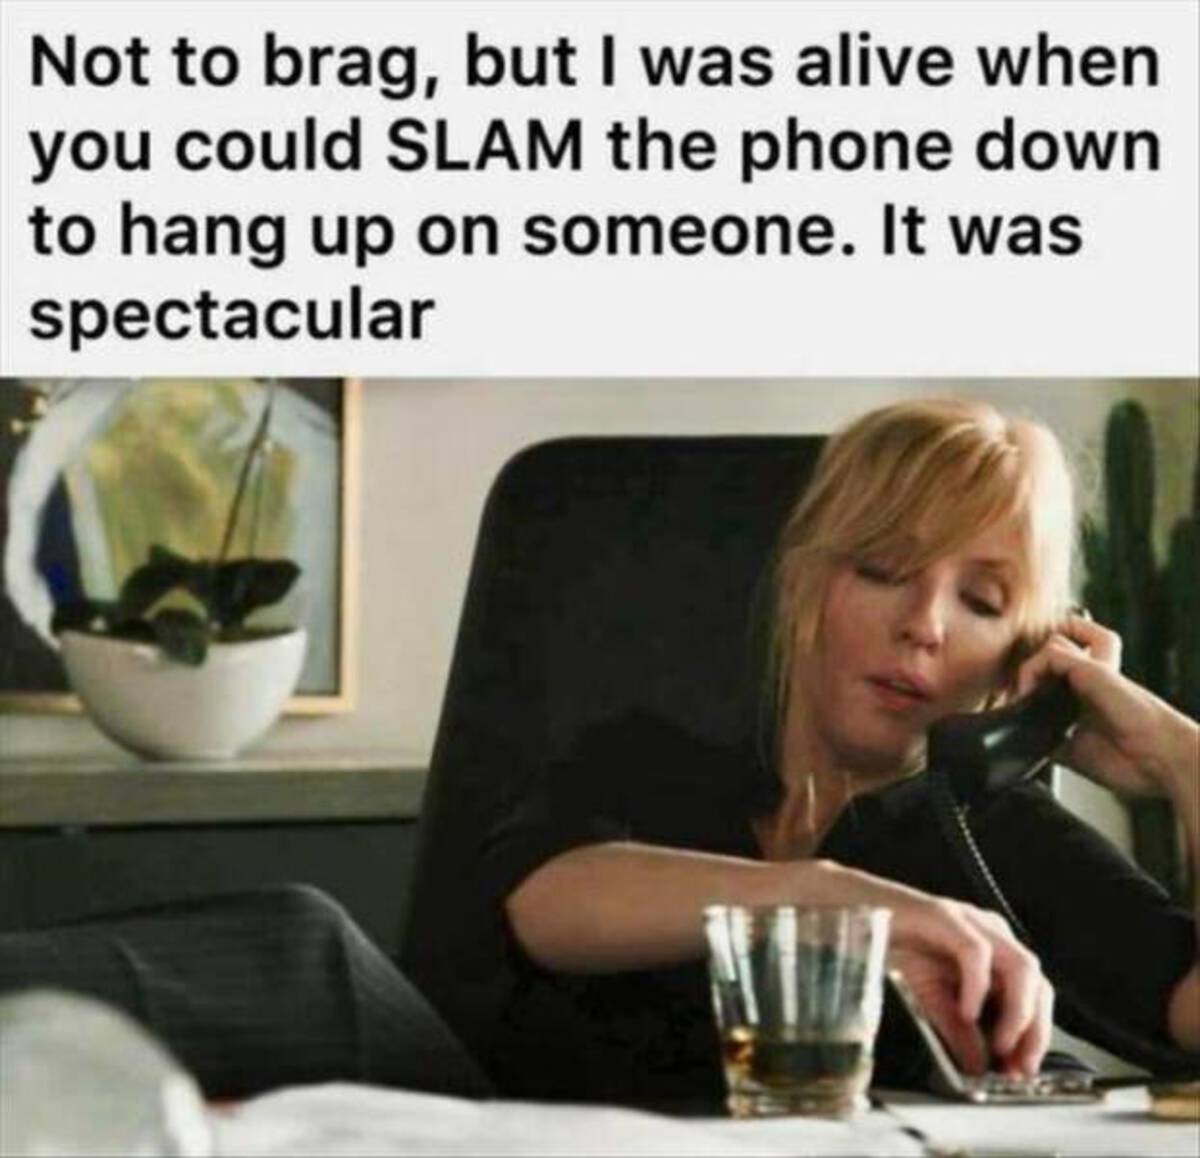 Meme - Not to brag, but I was alive when you could Slam the phone down to hang up on someone. It was spectacular !